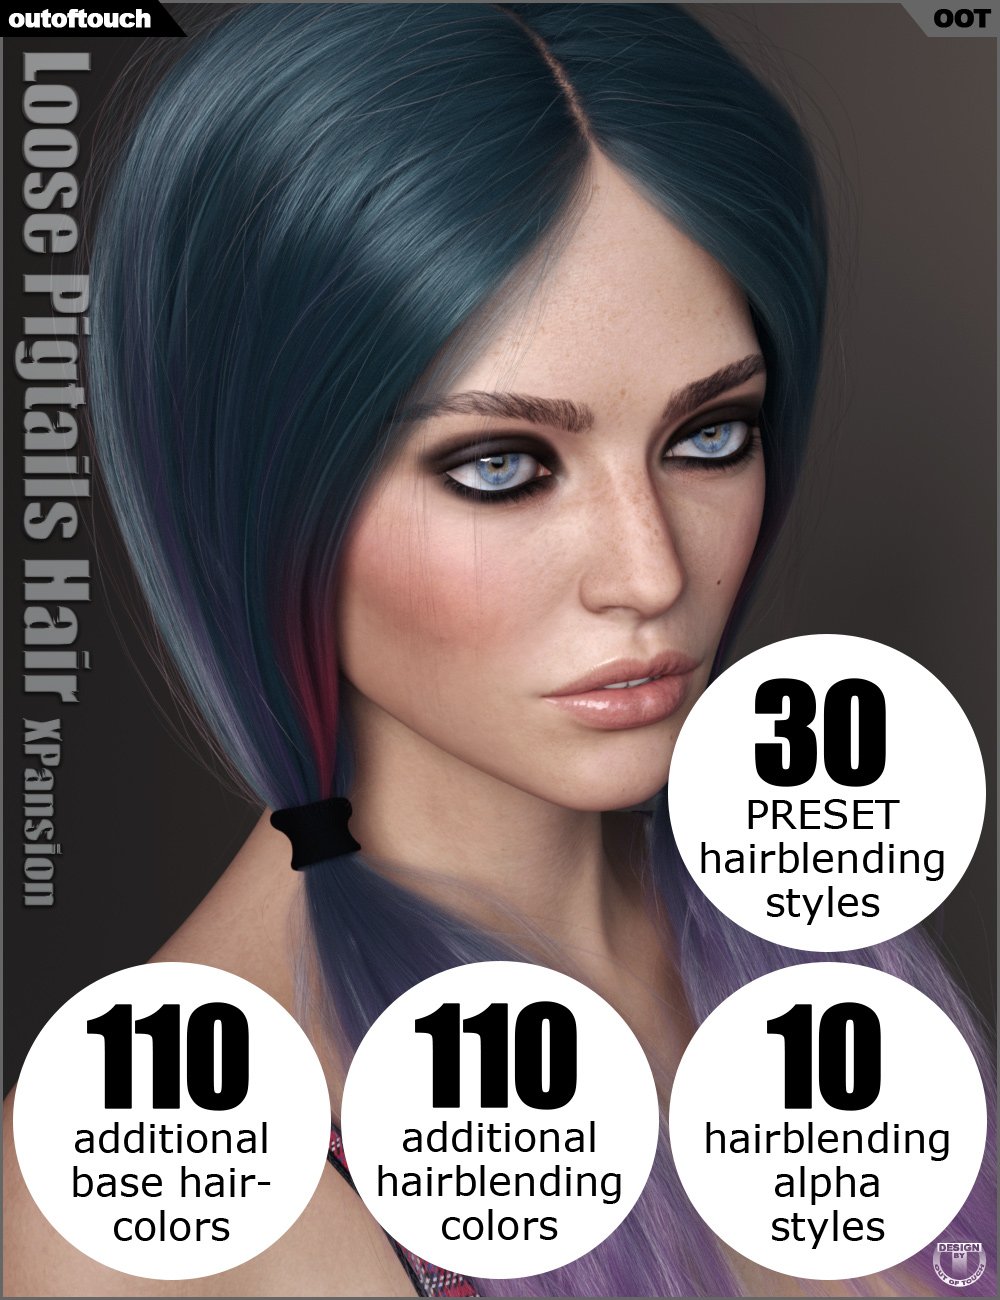 OOT Hairblending 2.0 Texture XPansion for Loose Pigtails Hair by: outoftouch, 3D Models by Daz 3D